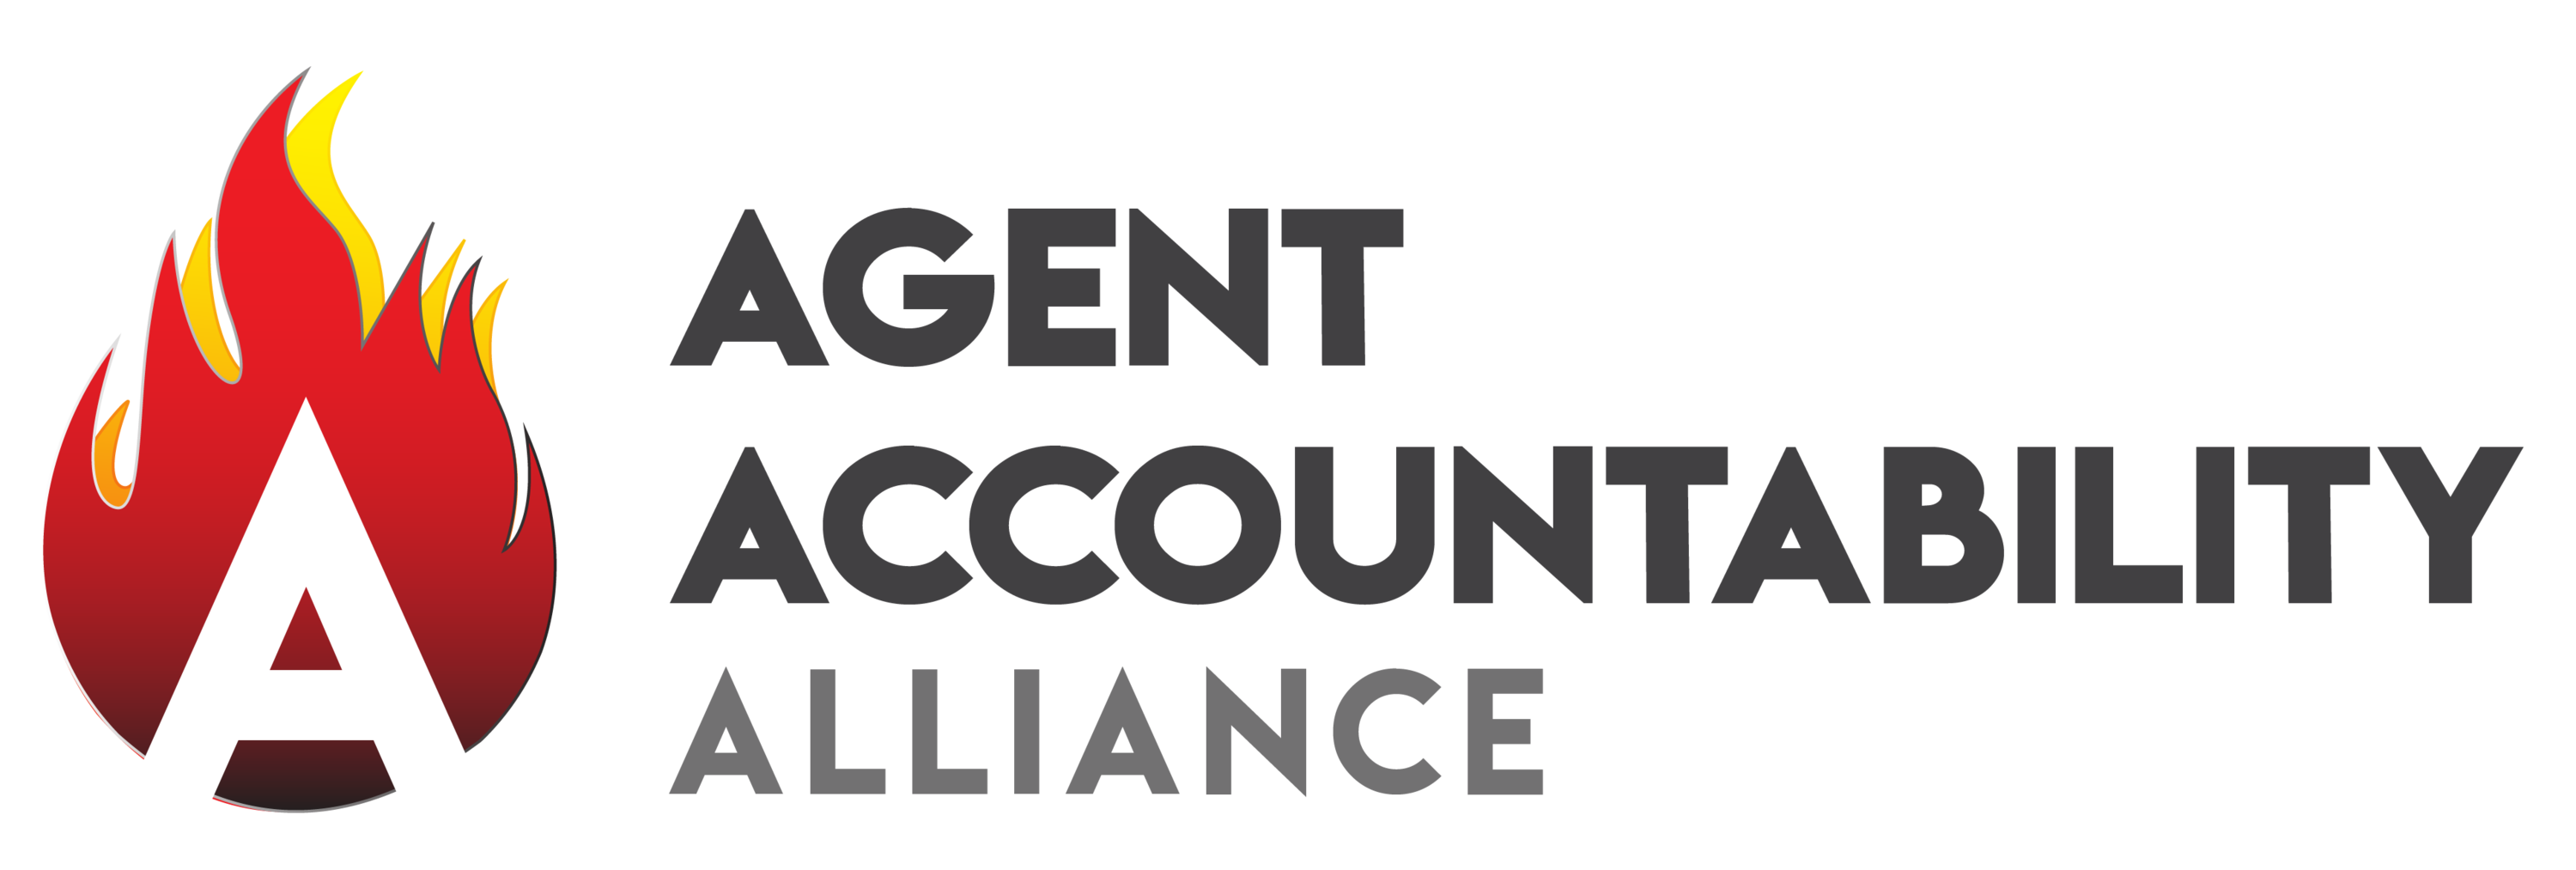 Elite Level Agent Accountability Aliance Check Out Page